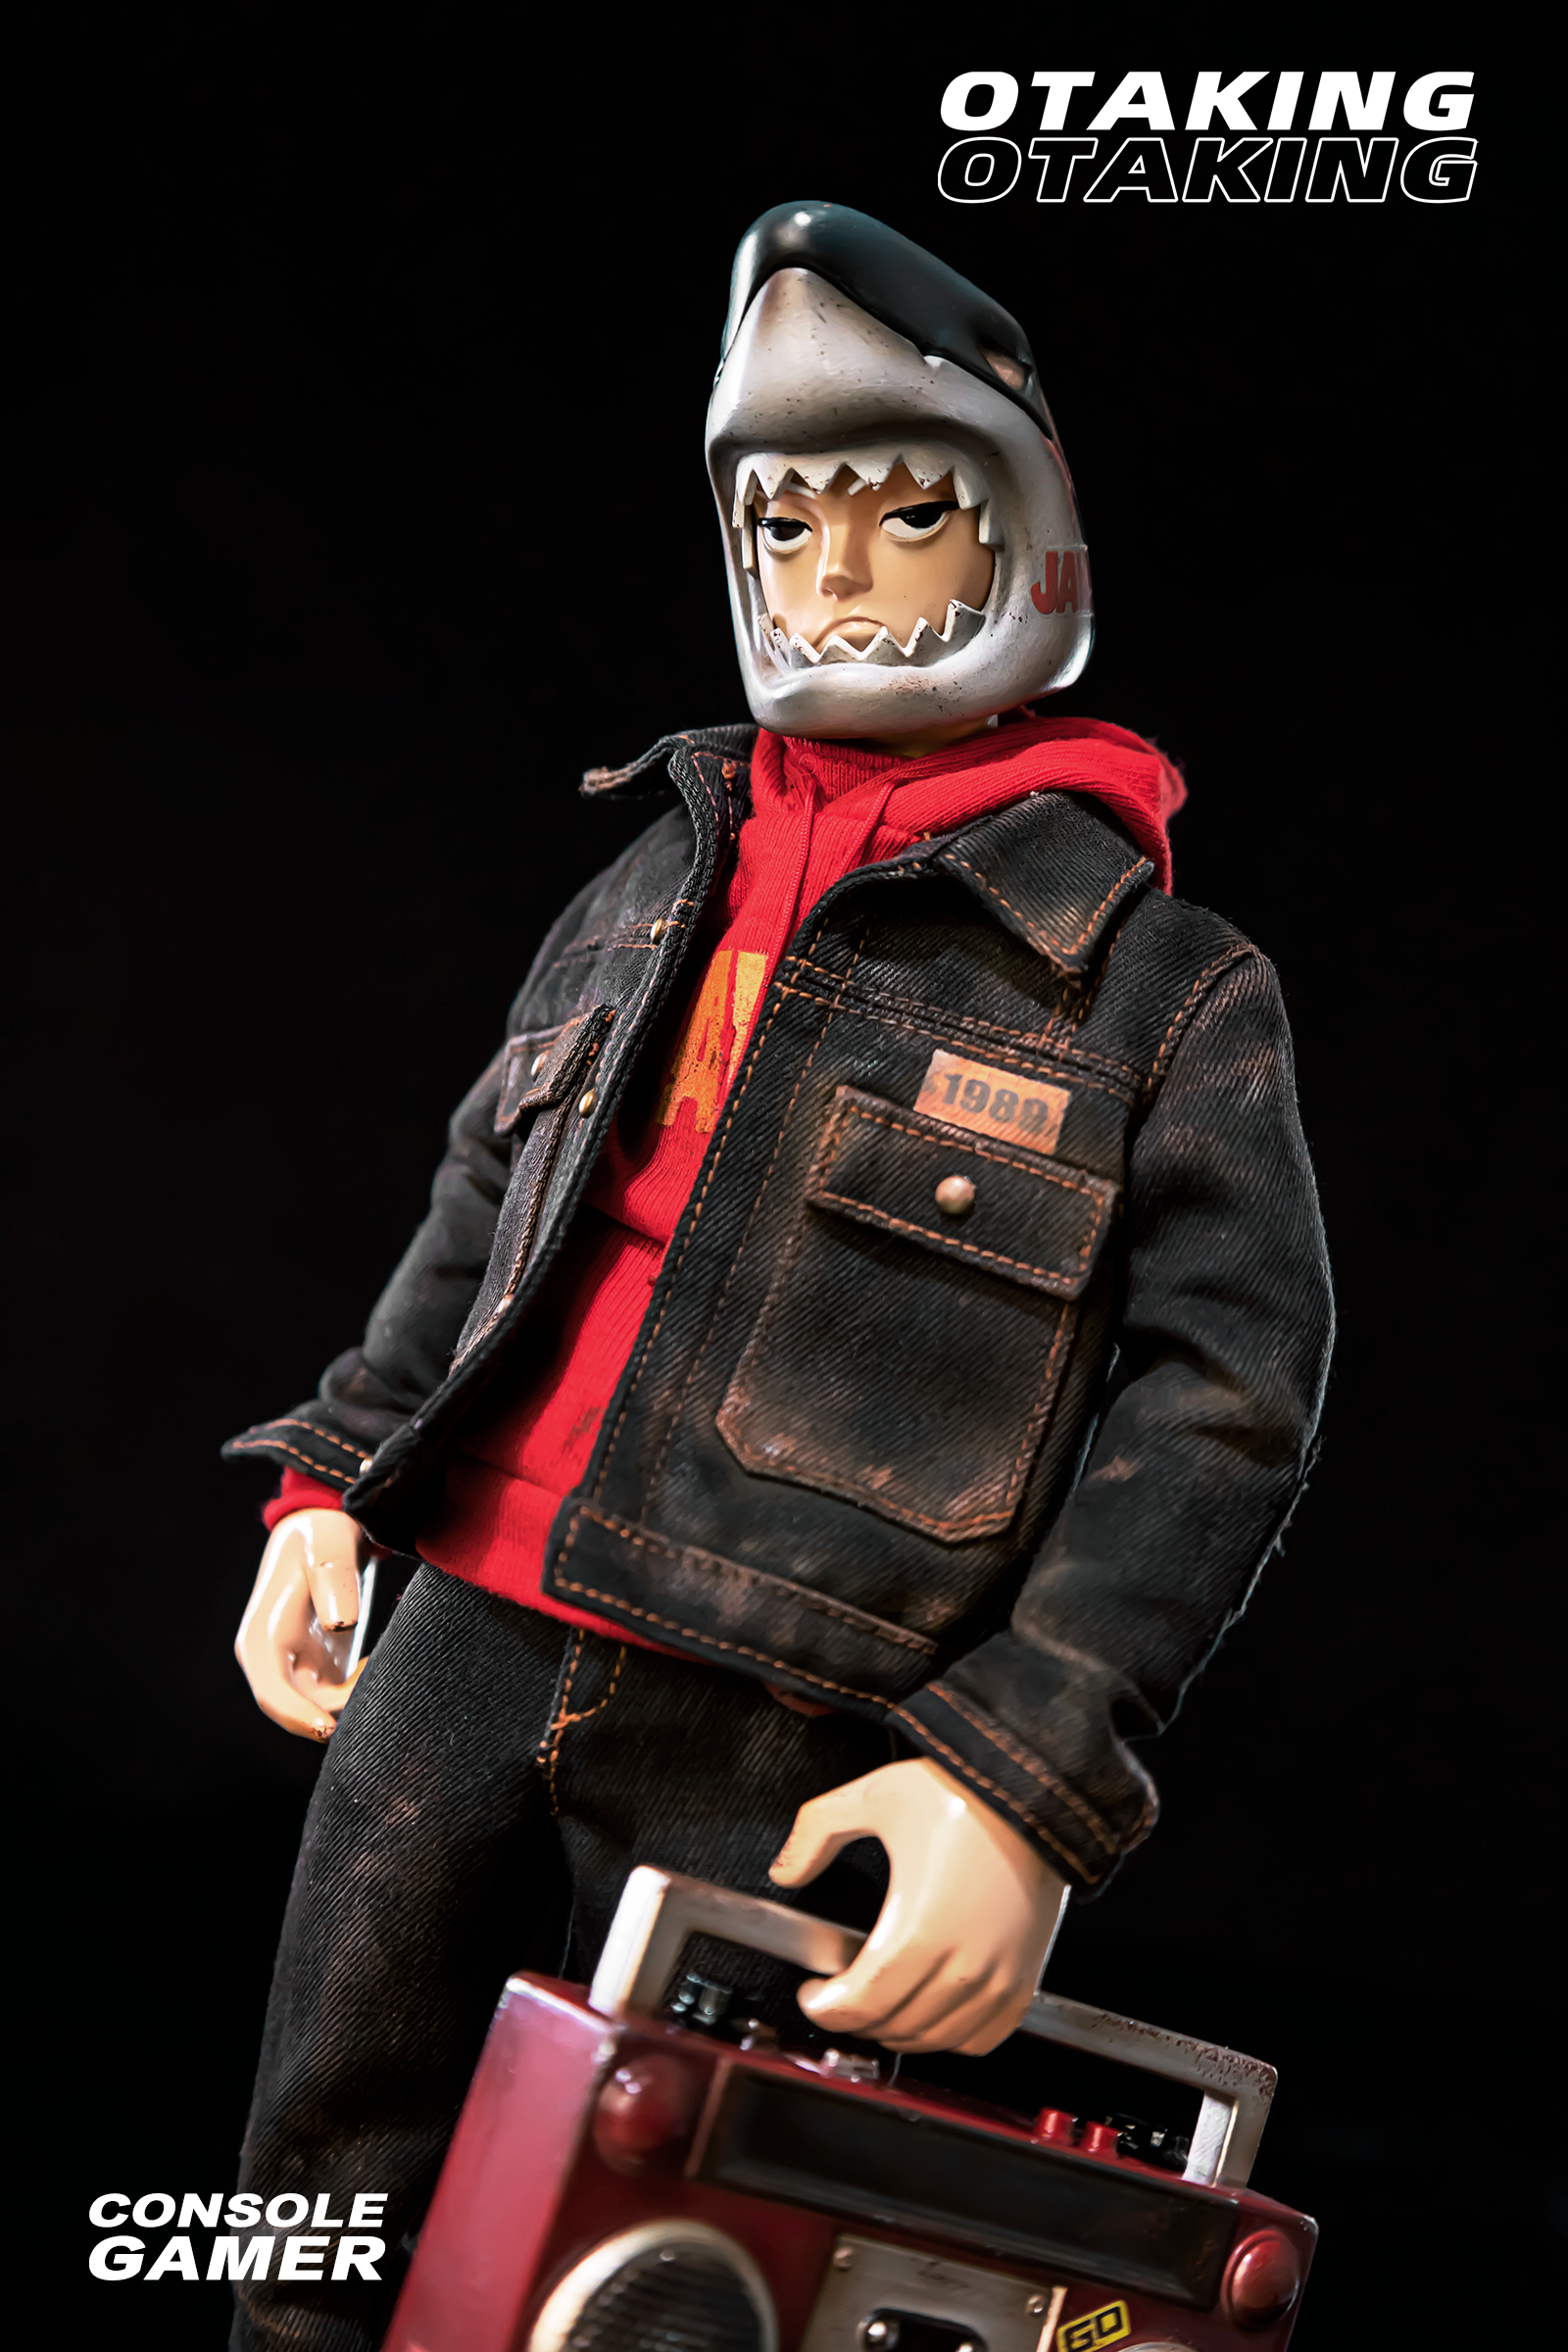 A toy doll in a red shirt and helmet, part of OTAKING - Console Gamer set with various accessories.